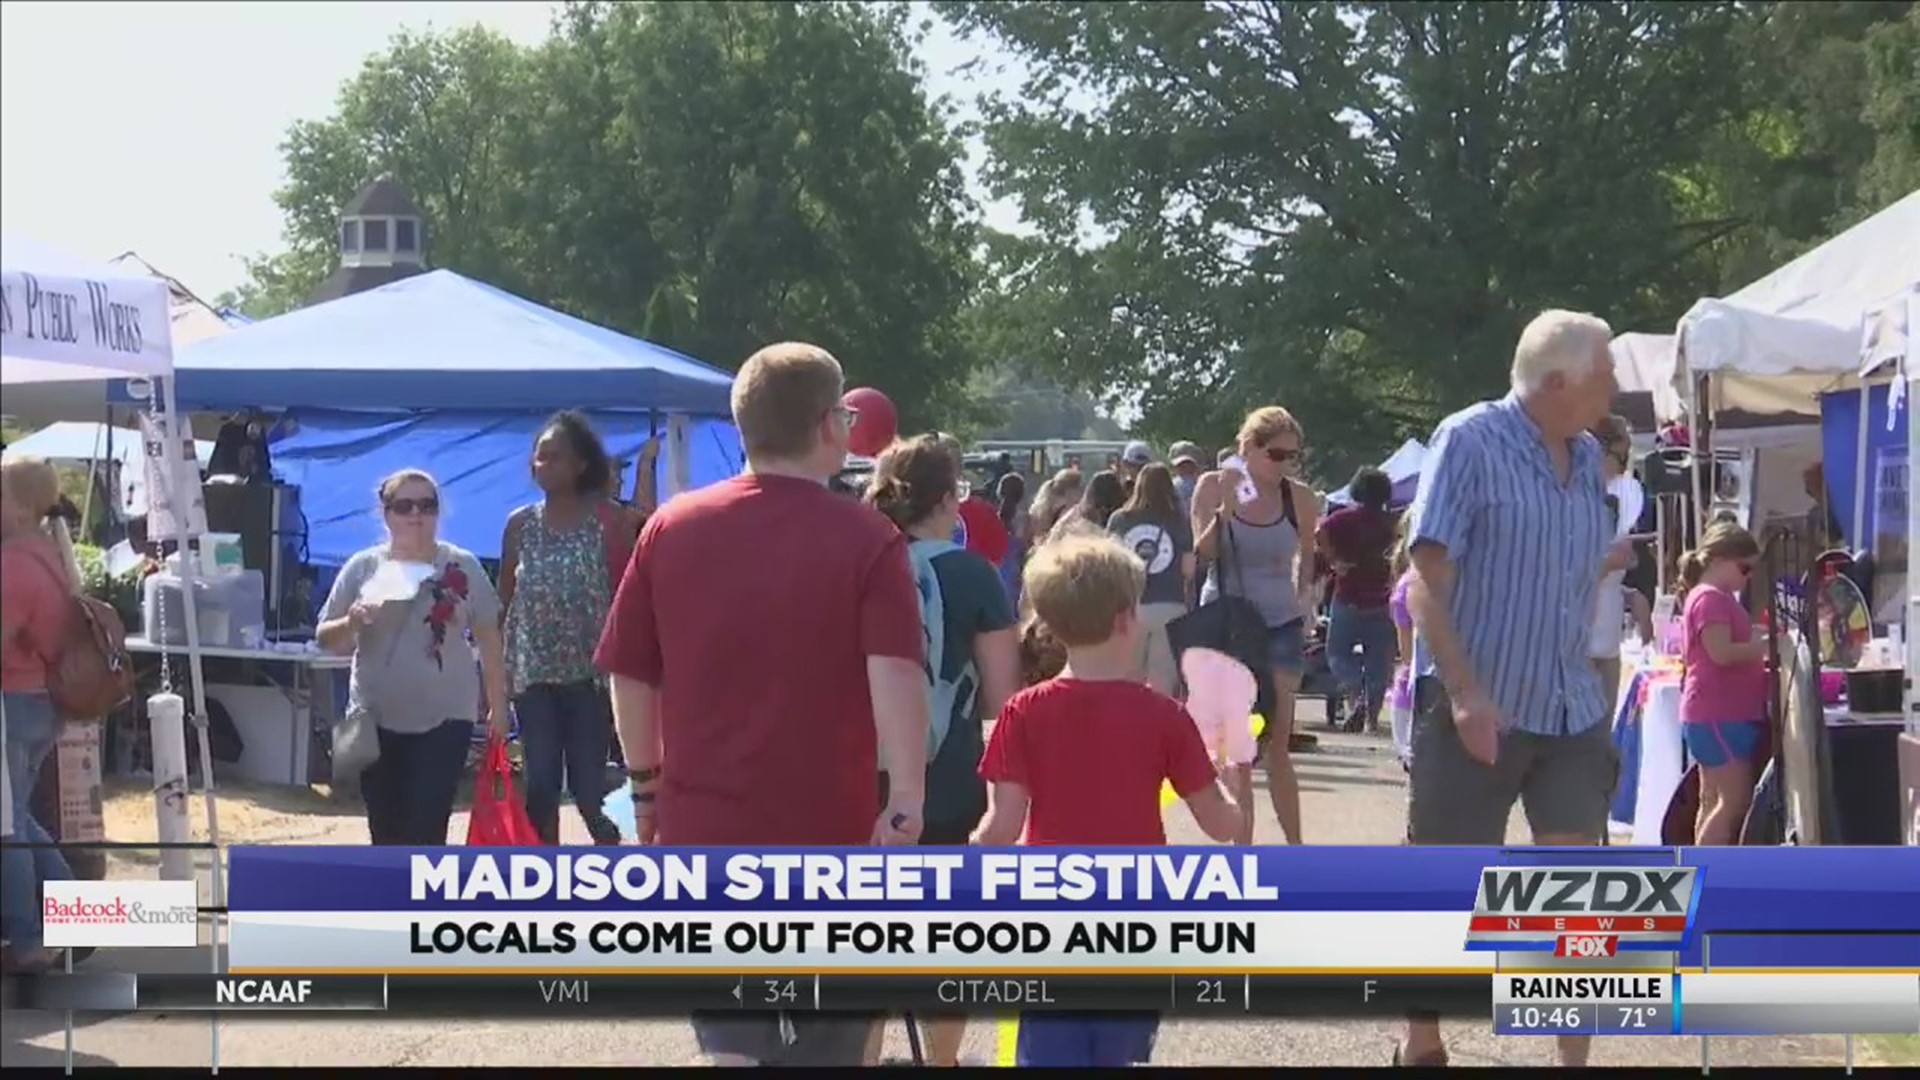 Hundreds came out to Madison for the fun, requiring satellite parking lots and school buses to shuttle attendees from their cars to the main festival area.